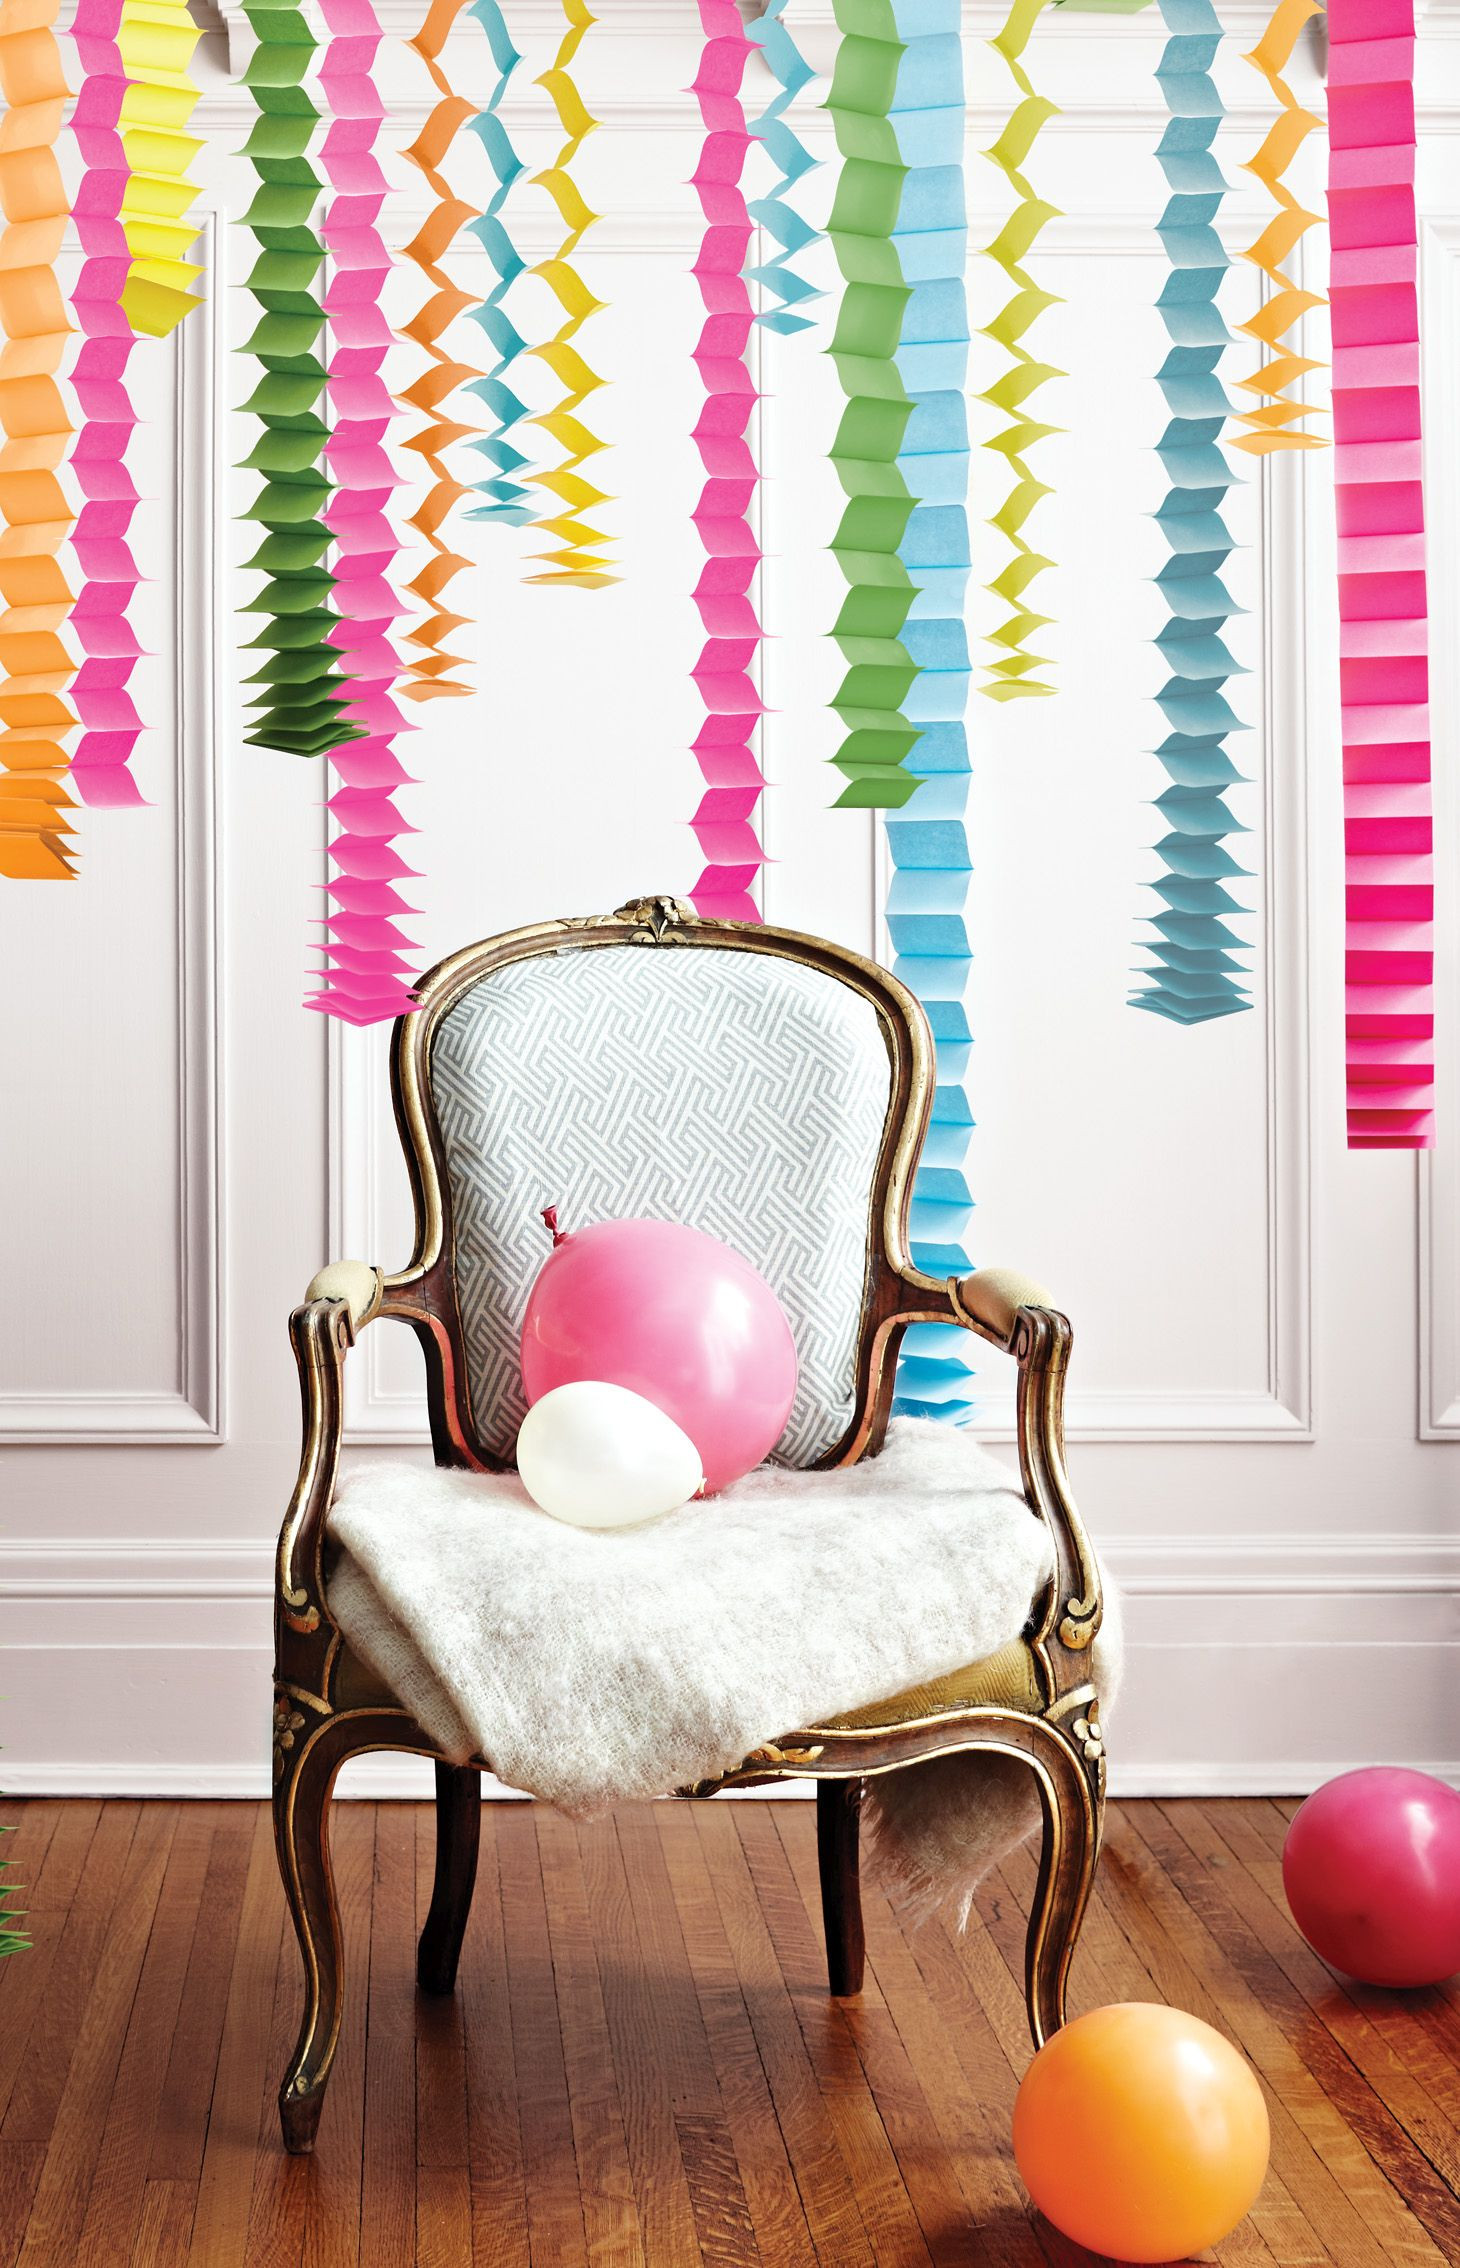 DIY Birthday Decorations Ideas
 Creating A Housewarming Party With DIY Decorations